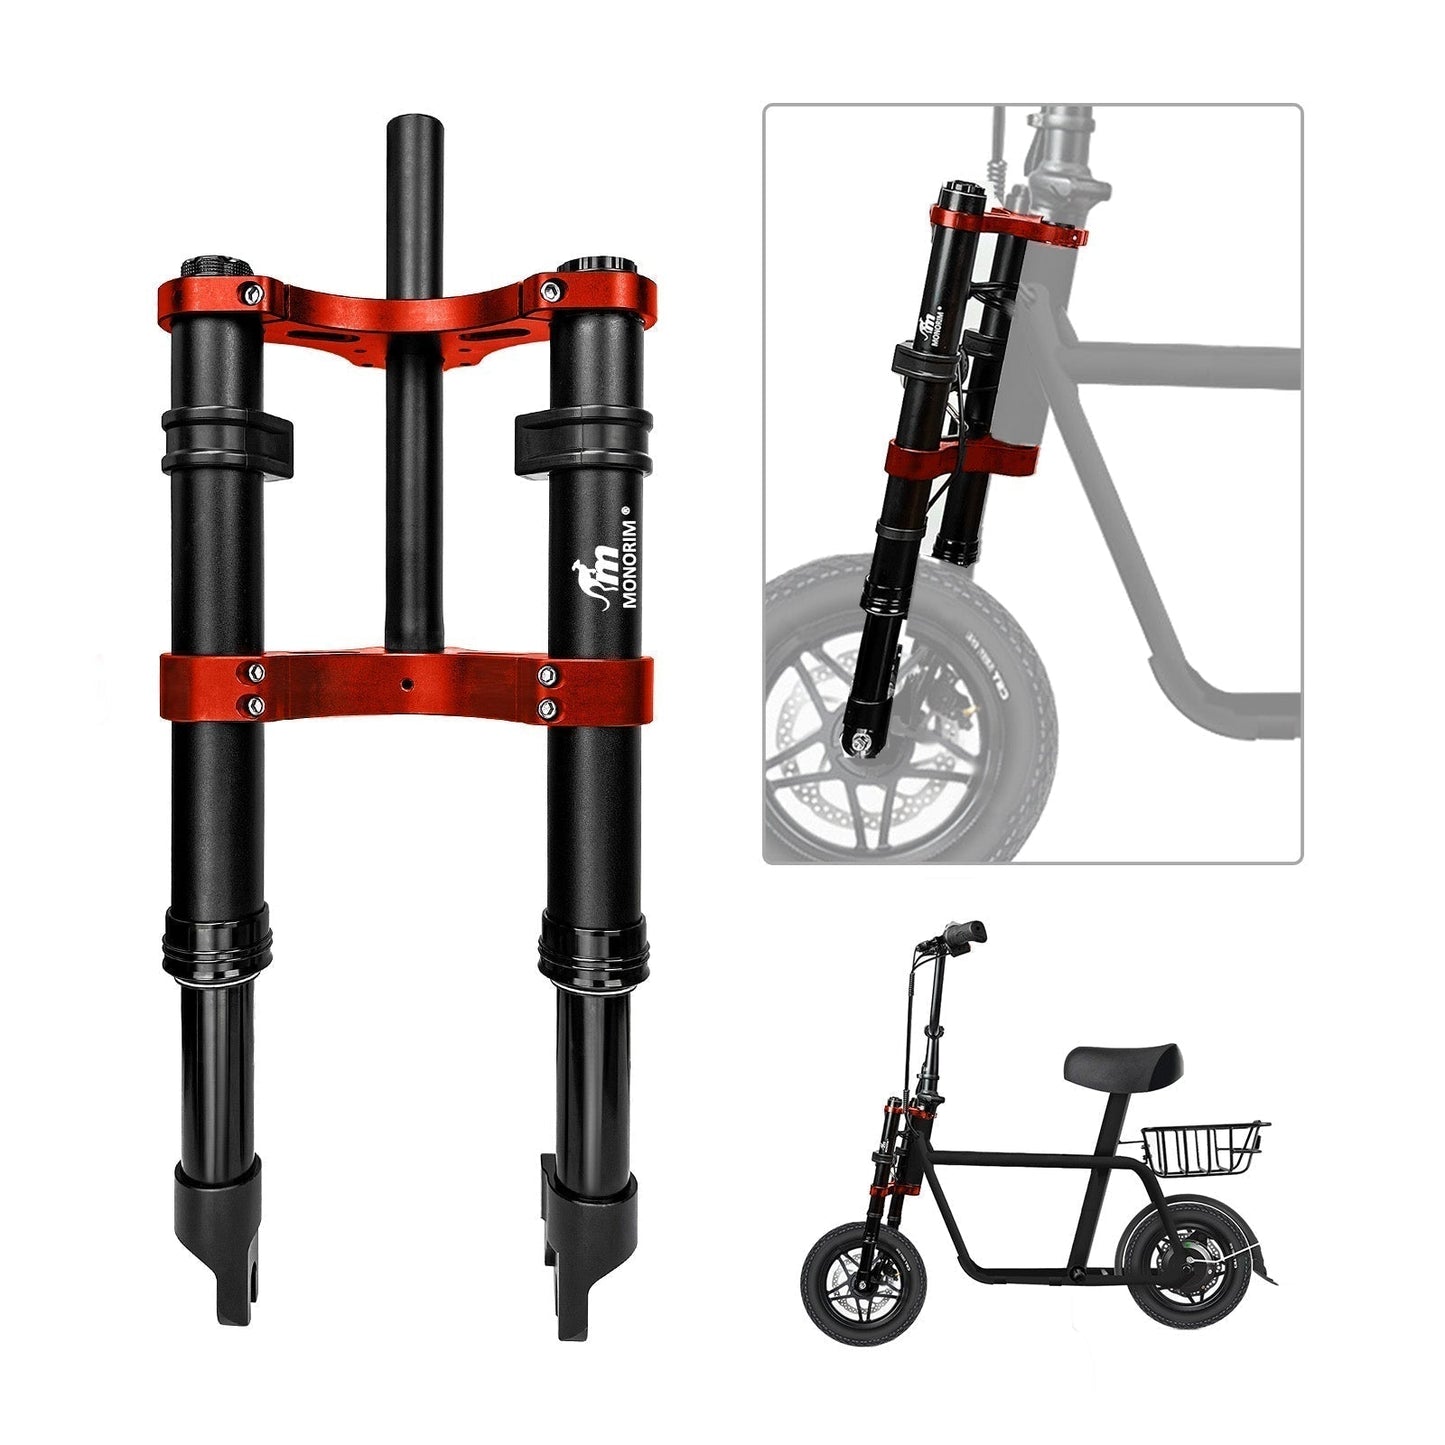 Monorim MB0-12inch front air suspension modify great kit to be more safety and comfort for Fiido Q2 ebike